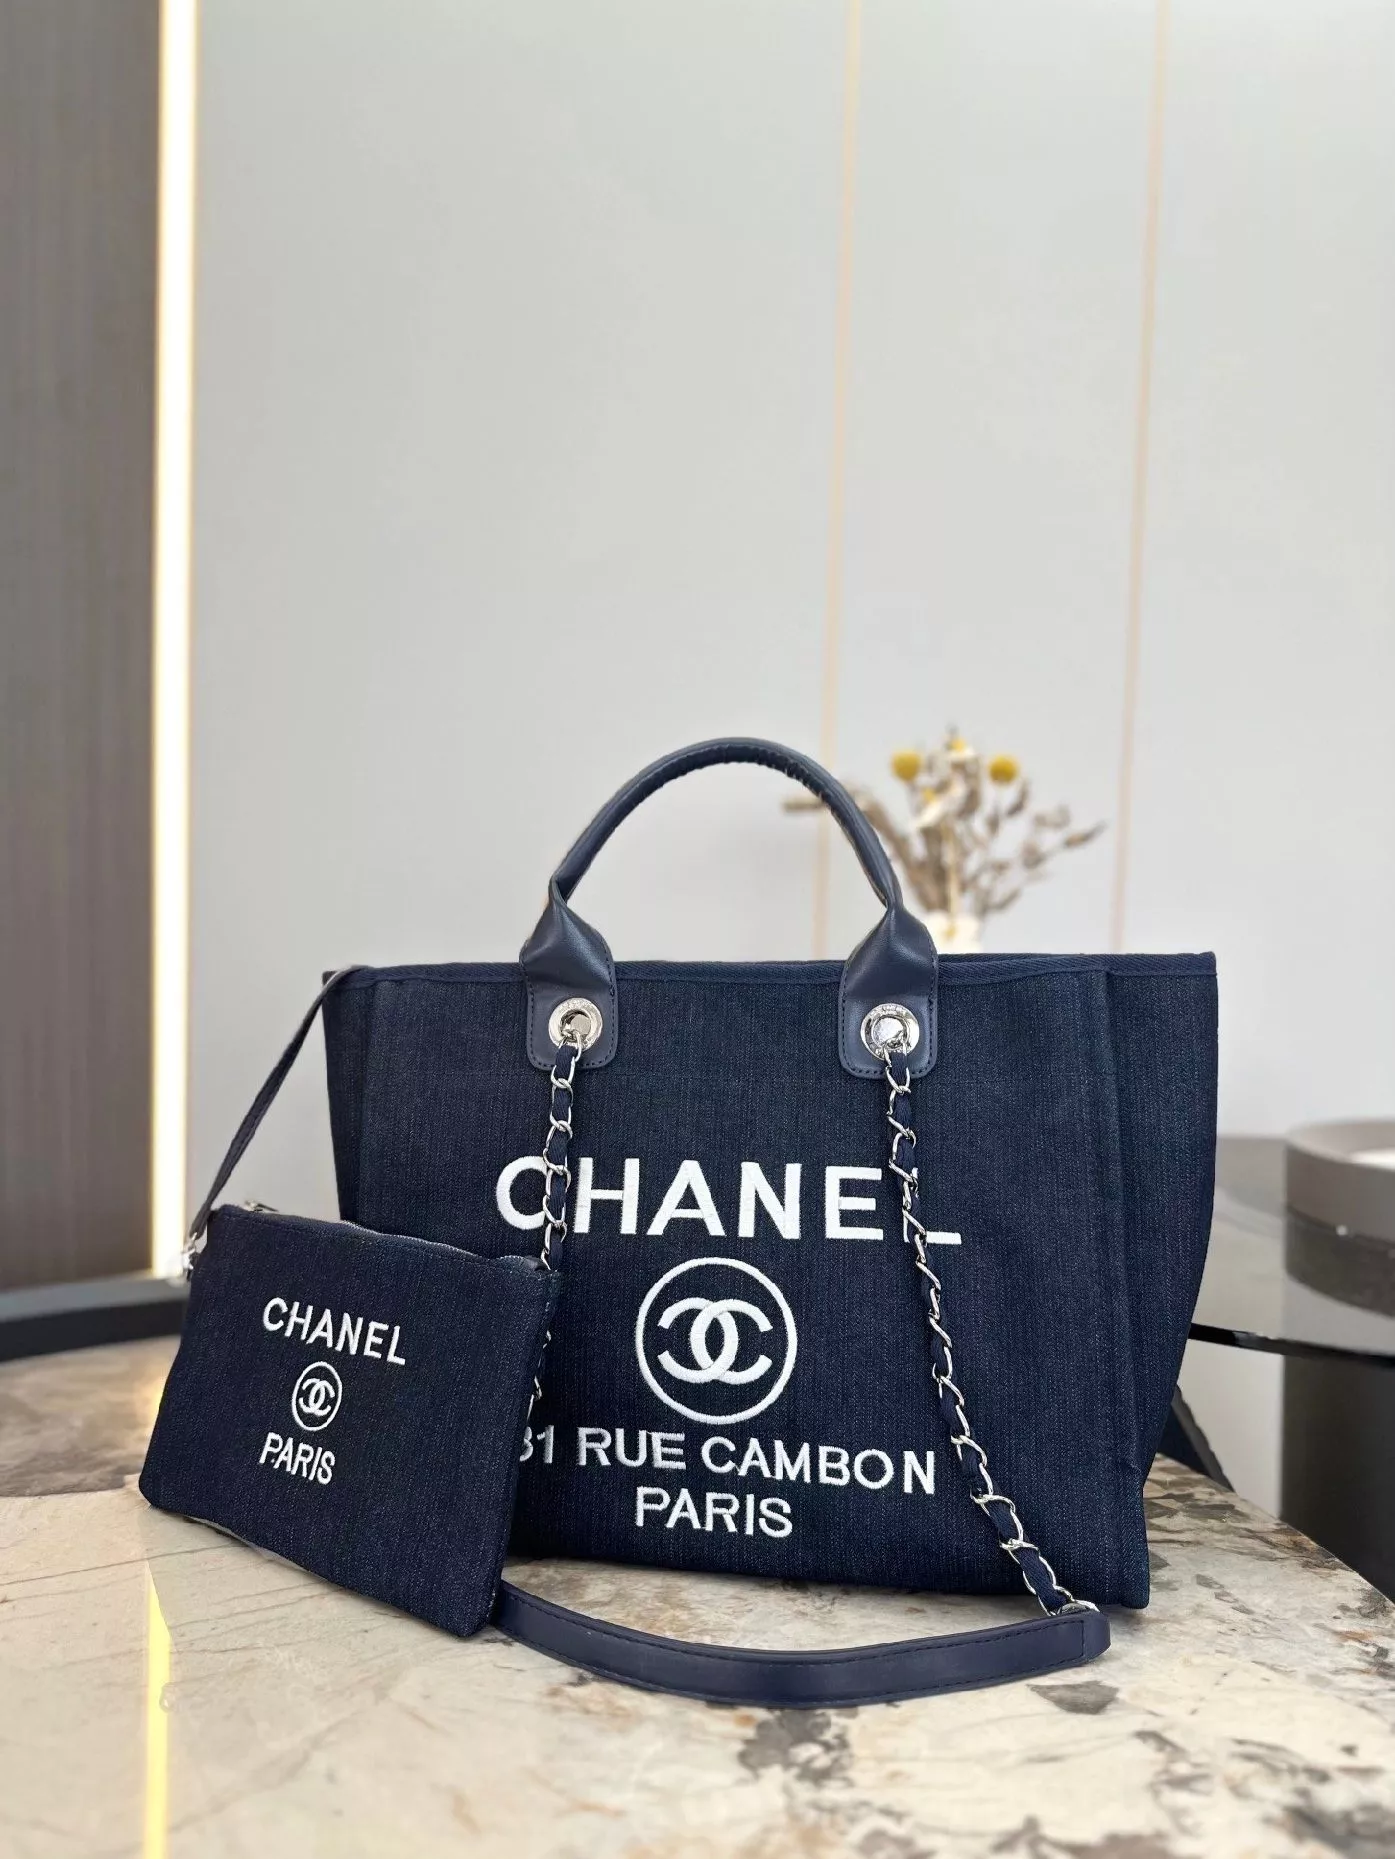 Super cute Chanel bag, Gallery posted by mimio11